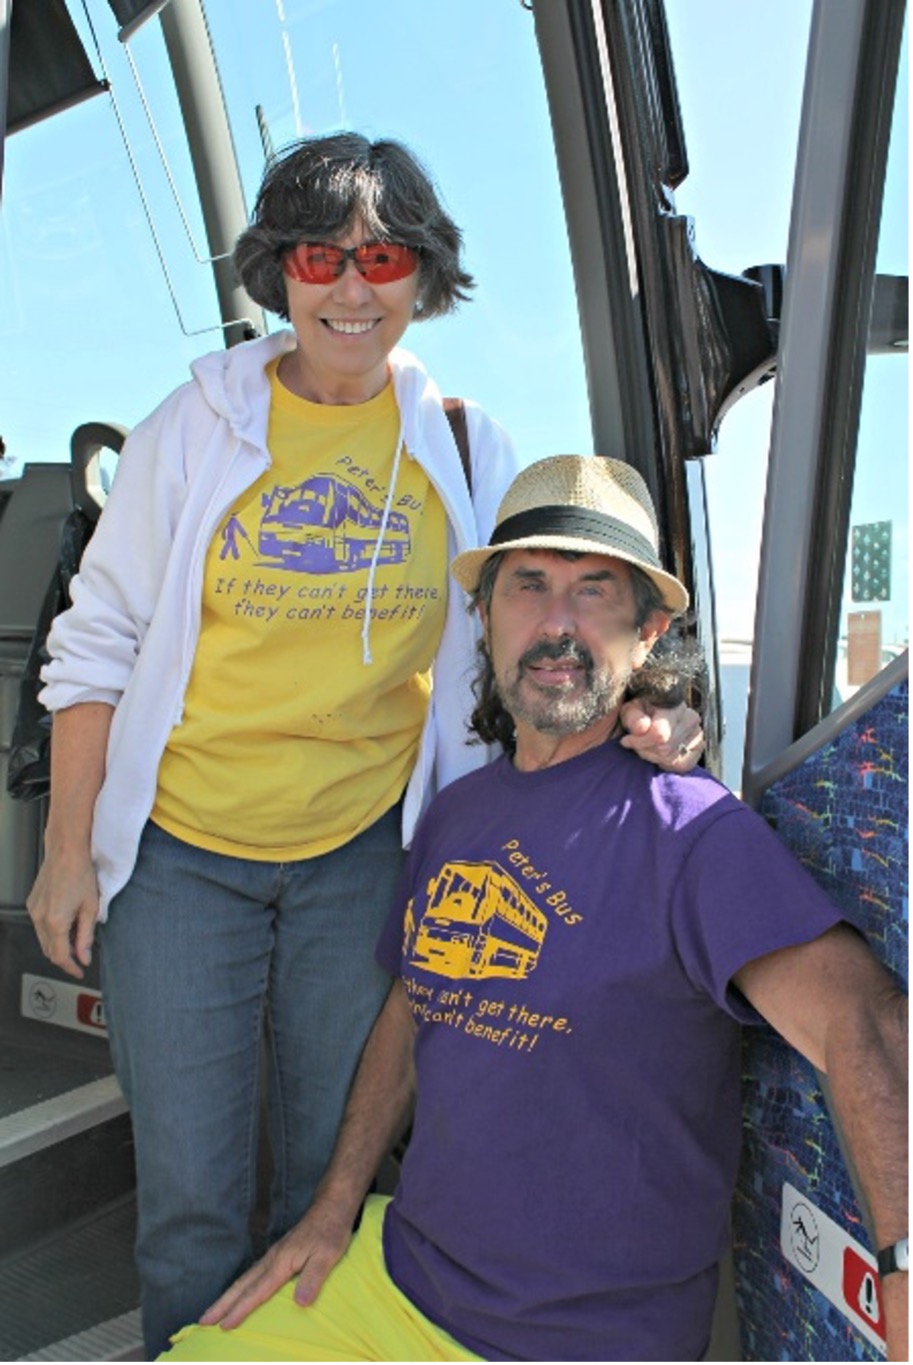 Peter and his wife Denise pose for a photograph at the bus entrance. Both are wearing t-shirts that say, "If they can't get there, they can't benefit."